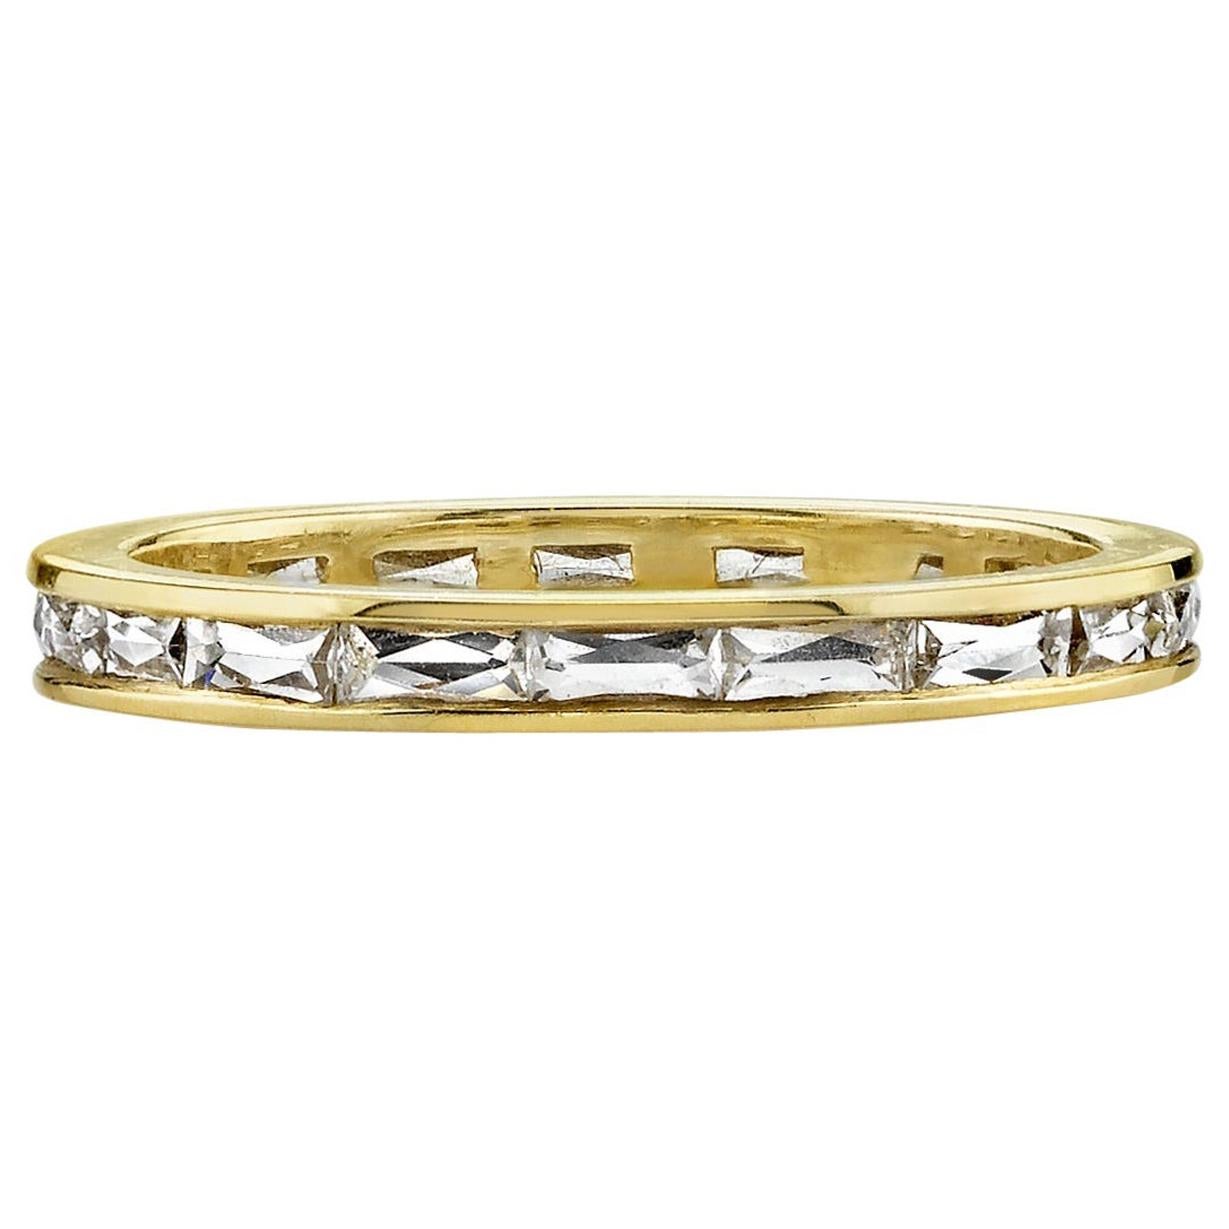 For Sale:  Handcrafted Emma French Cut Diamond Eternity Band by Single Stone